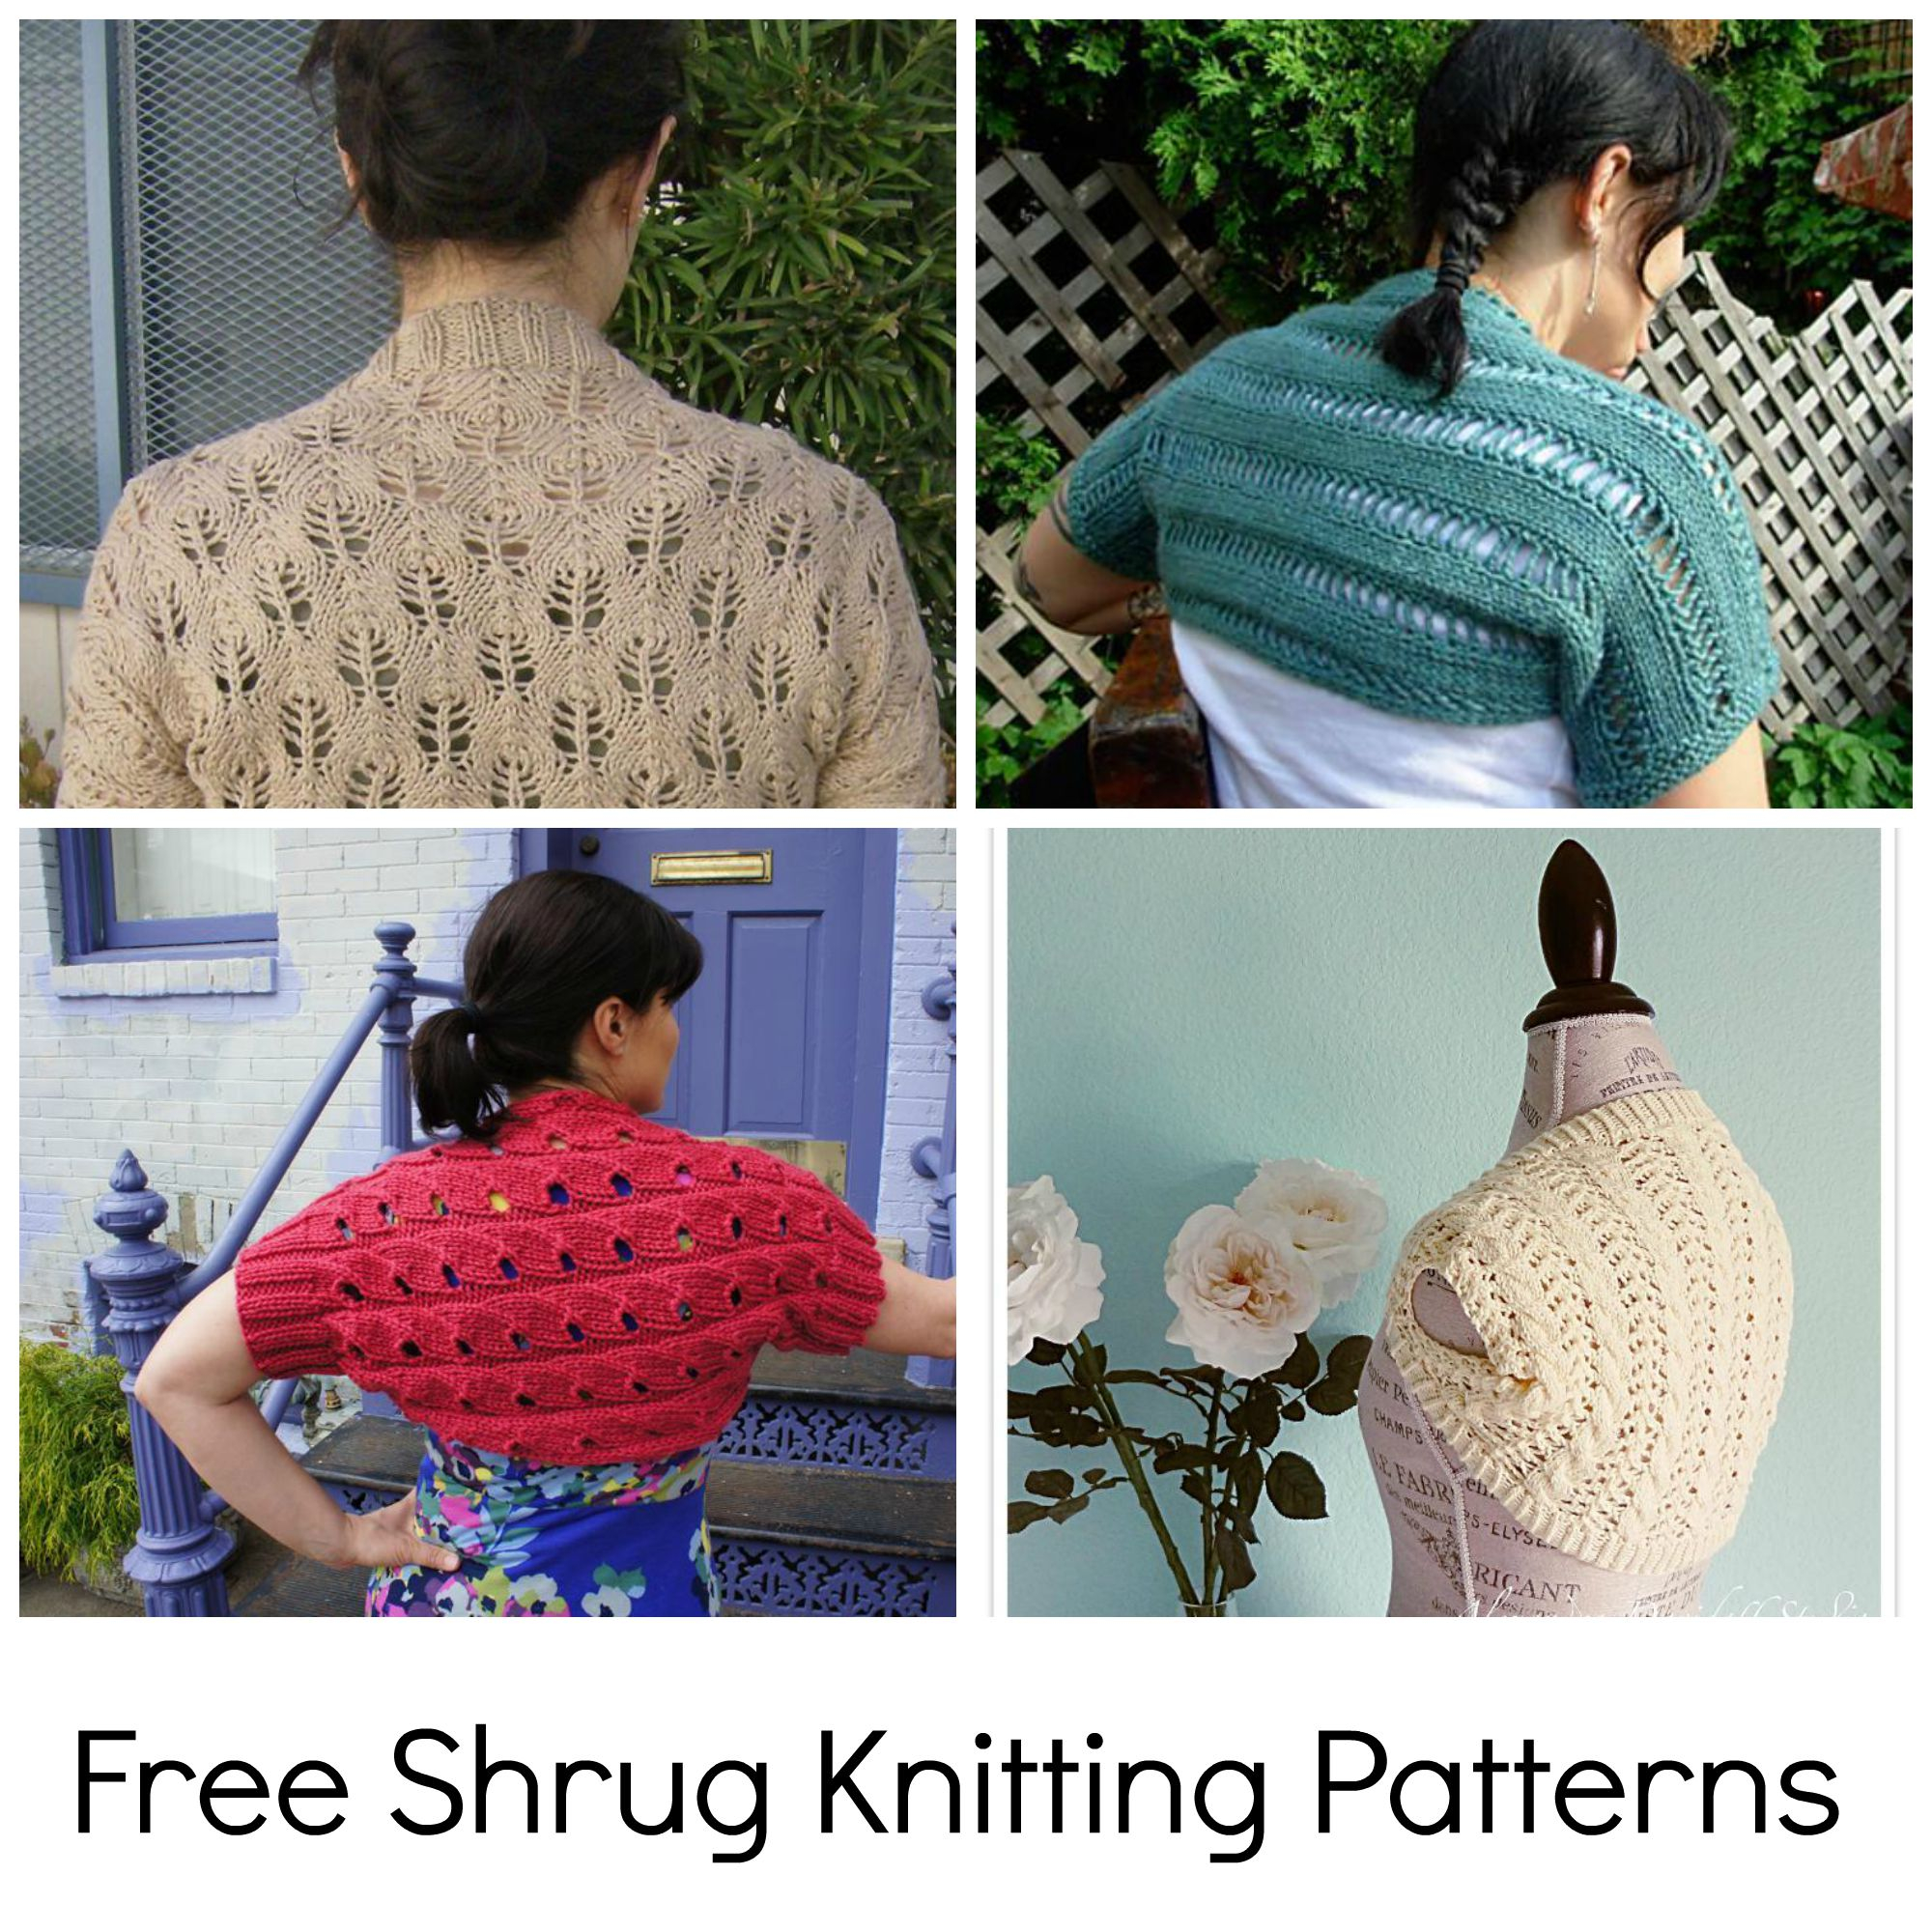 Knit Shrug Pattern Easy Try A Free Shrug Knitting Pattern For Easy Layering